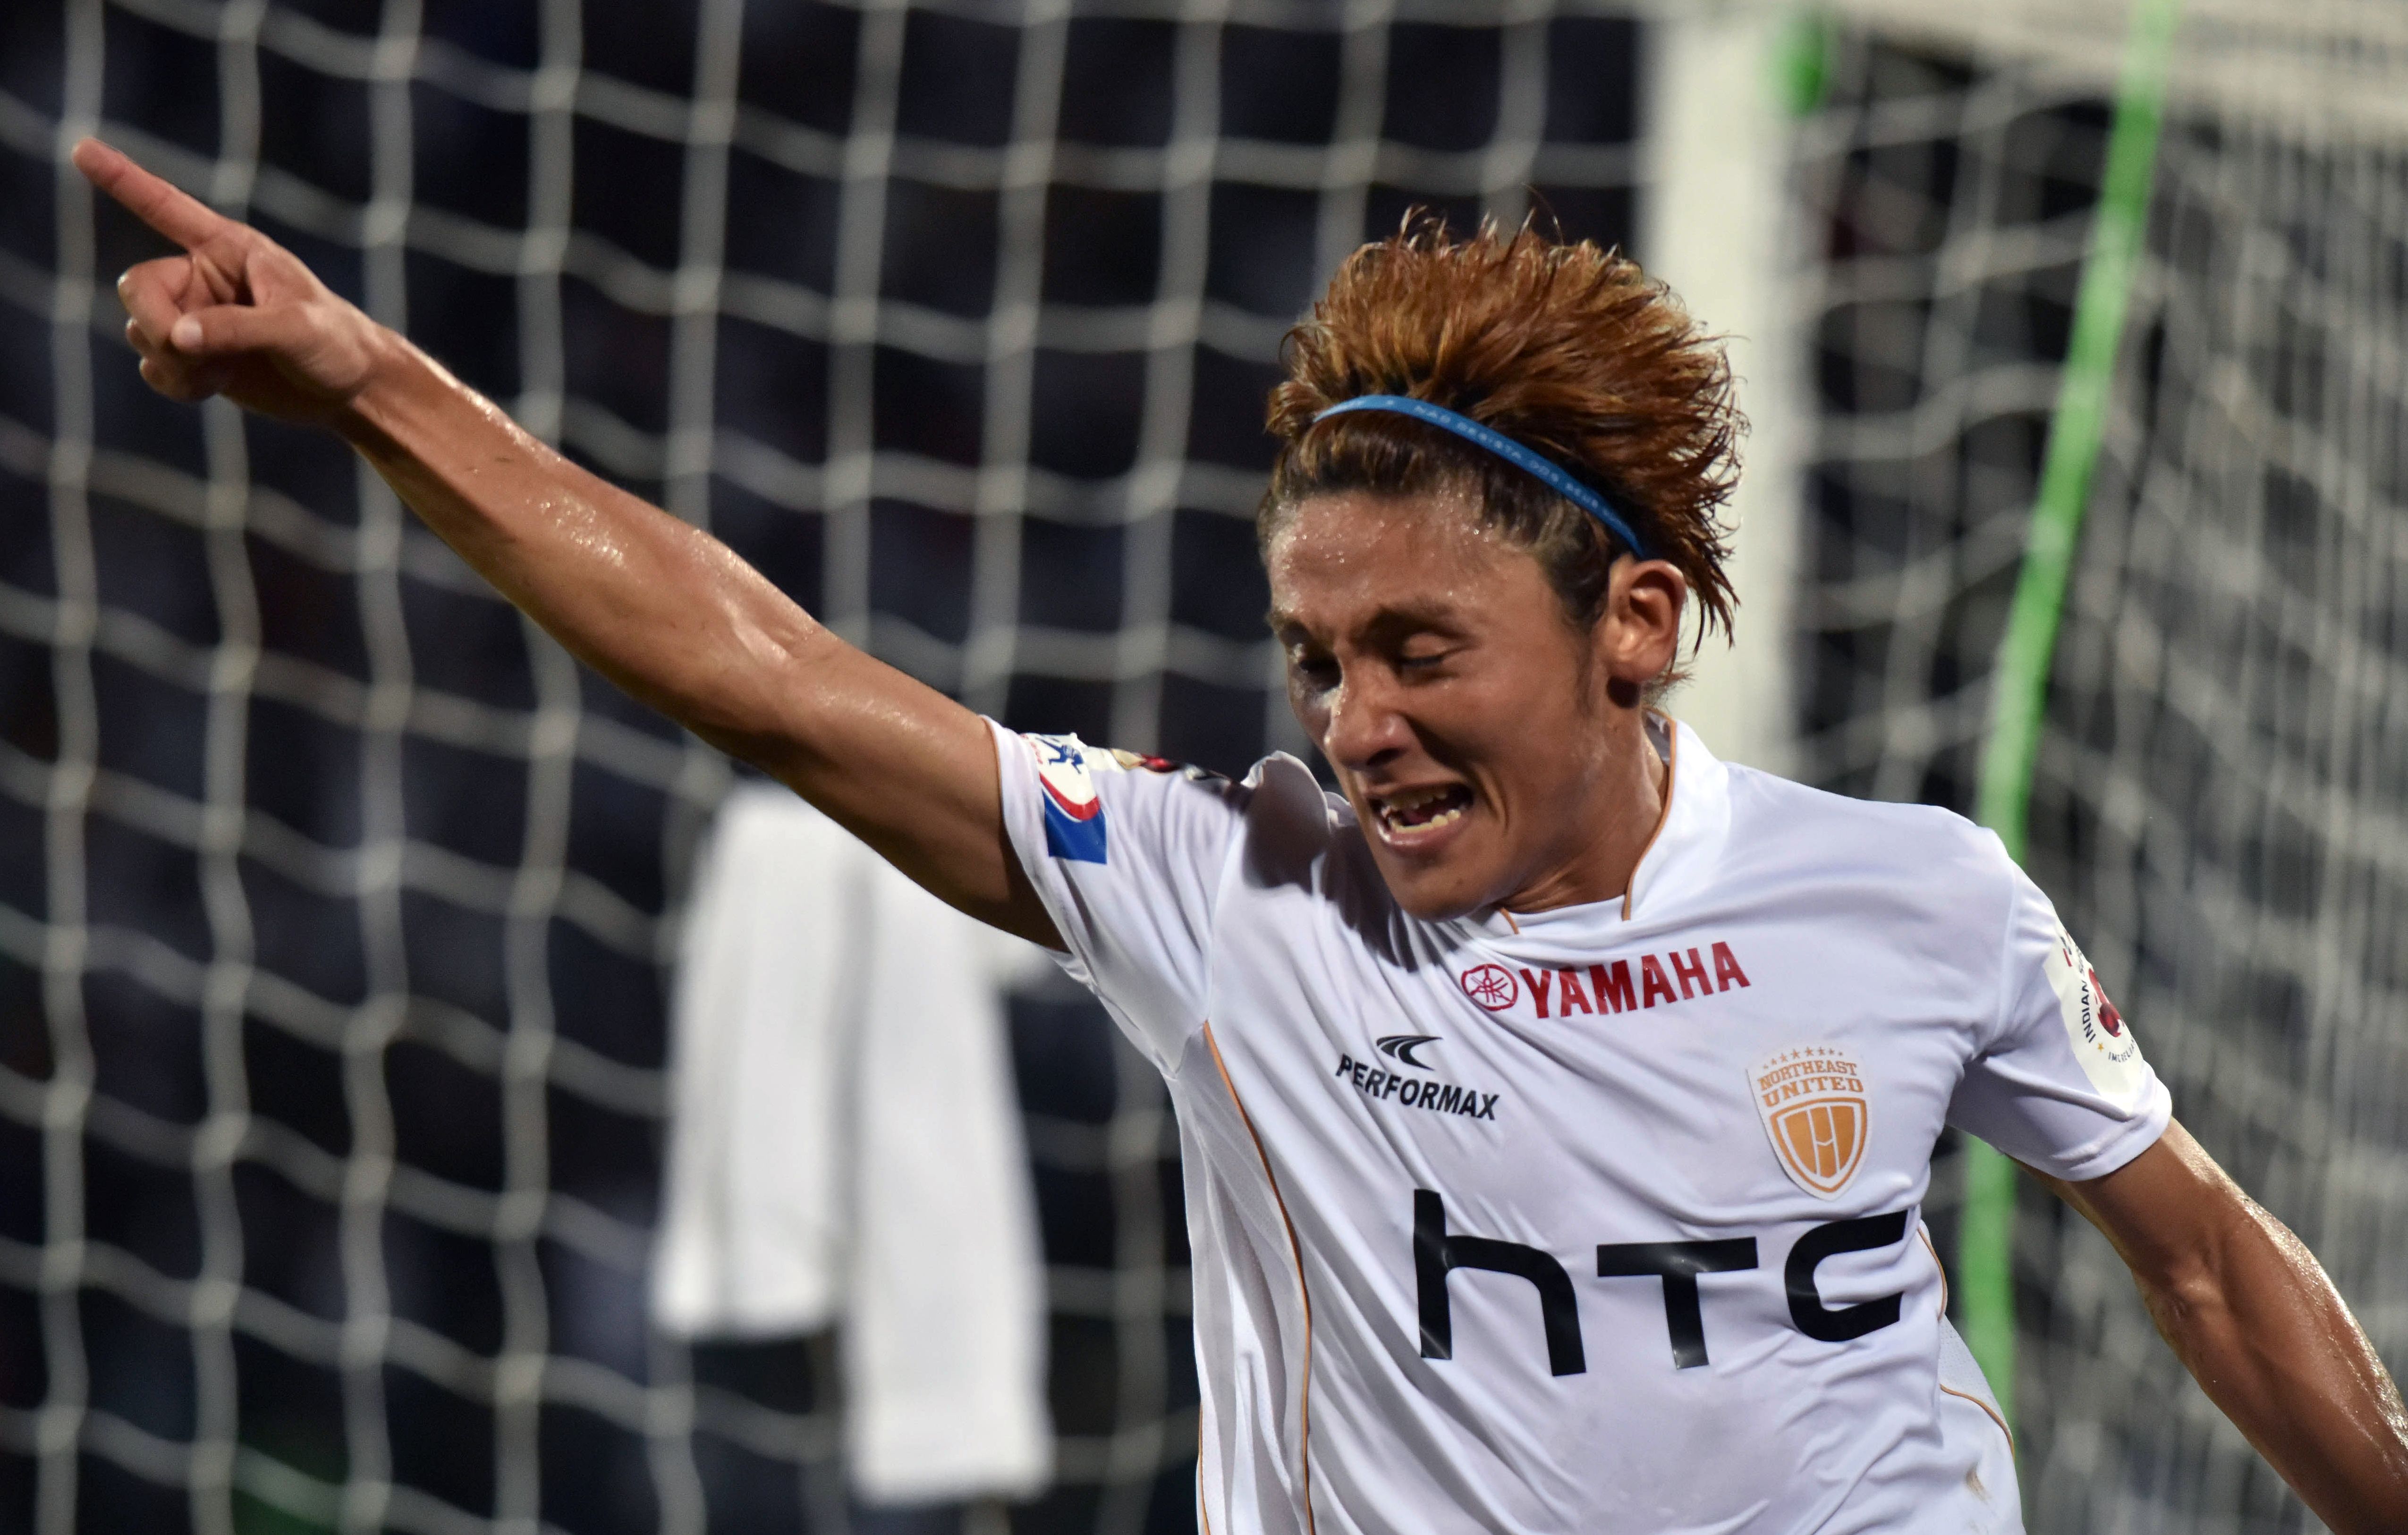 Northeast United FC's midfielder Katsumi Yusa celebrates after scoring a goal during the Indian Super League (ISL) football match between Northeast United FC and Kerala Blasters FC at The Indira Gandhi Athletic Stadium in Guwahati on October 1, 2016. 
----IMAGE RESTRICTED TO EDITORIAL USE - STRICTLY NO COMMERCIAL USE-- / AFP / Biju BORO        (Photo credit should read BIJU BORO/AFP/Getty Images)